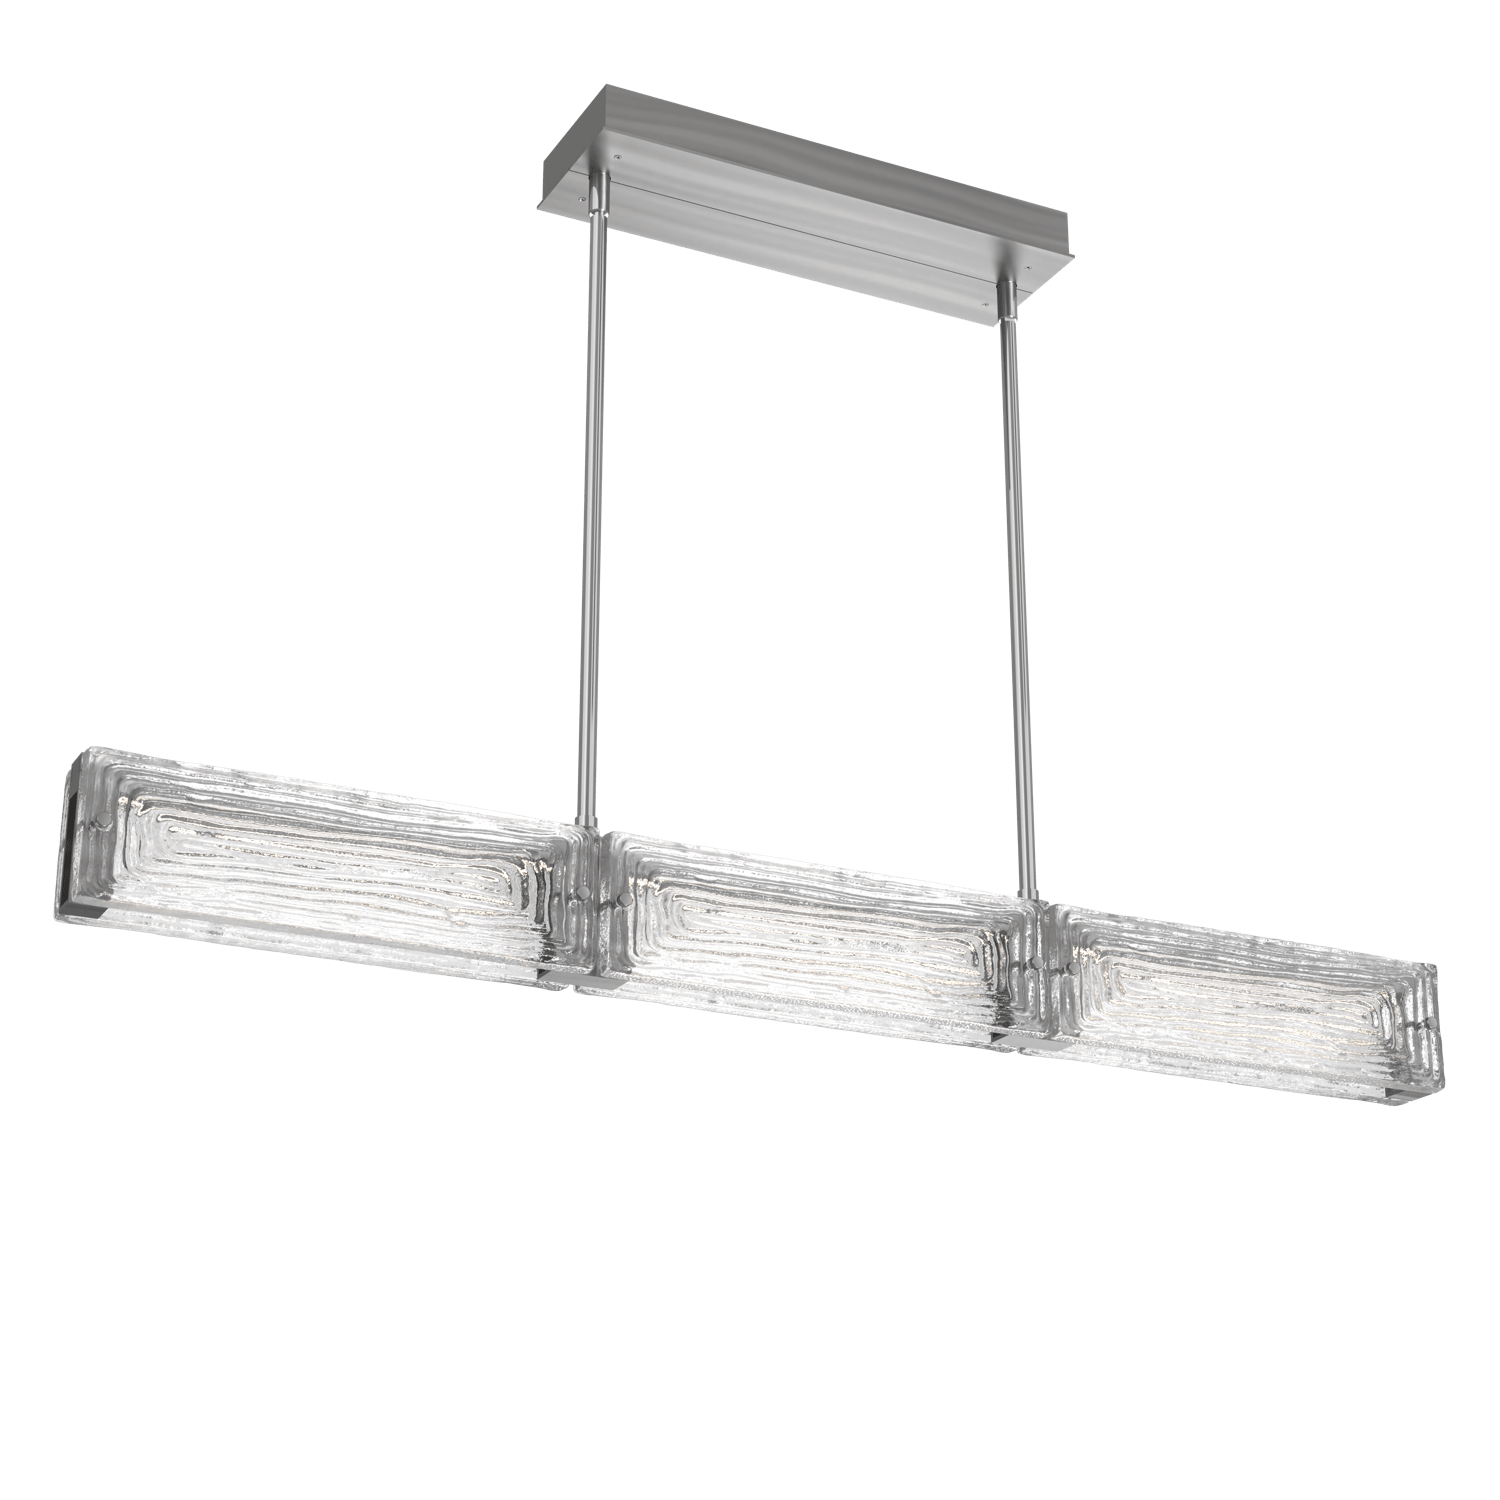 PLB0090-43-SN-TL-Hammerton-Studio-Tabulo-43-inch-linear-chandelier-with-satin-nickel-finish-and-clear-linea-cast-glass-shade-and-LED-lamping